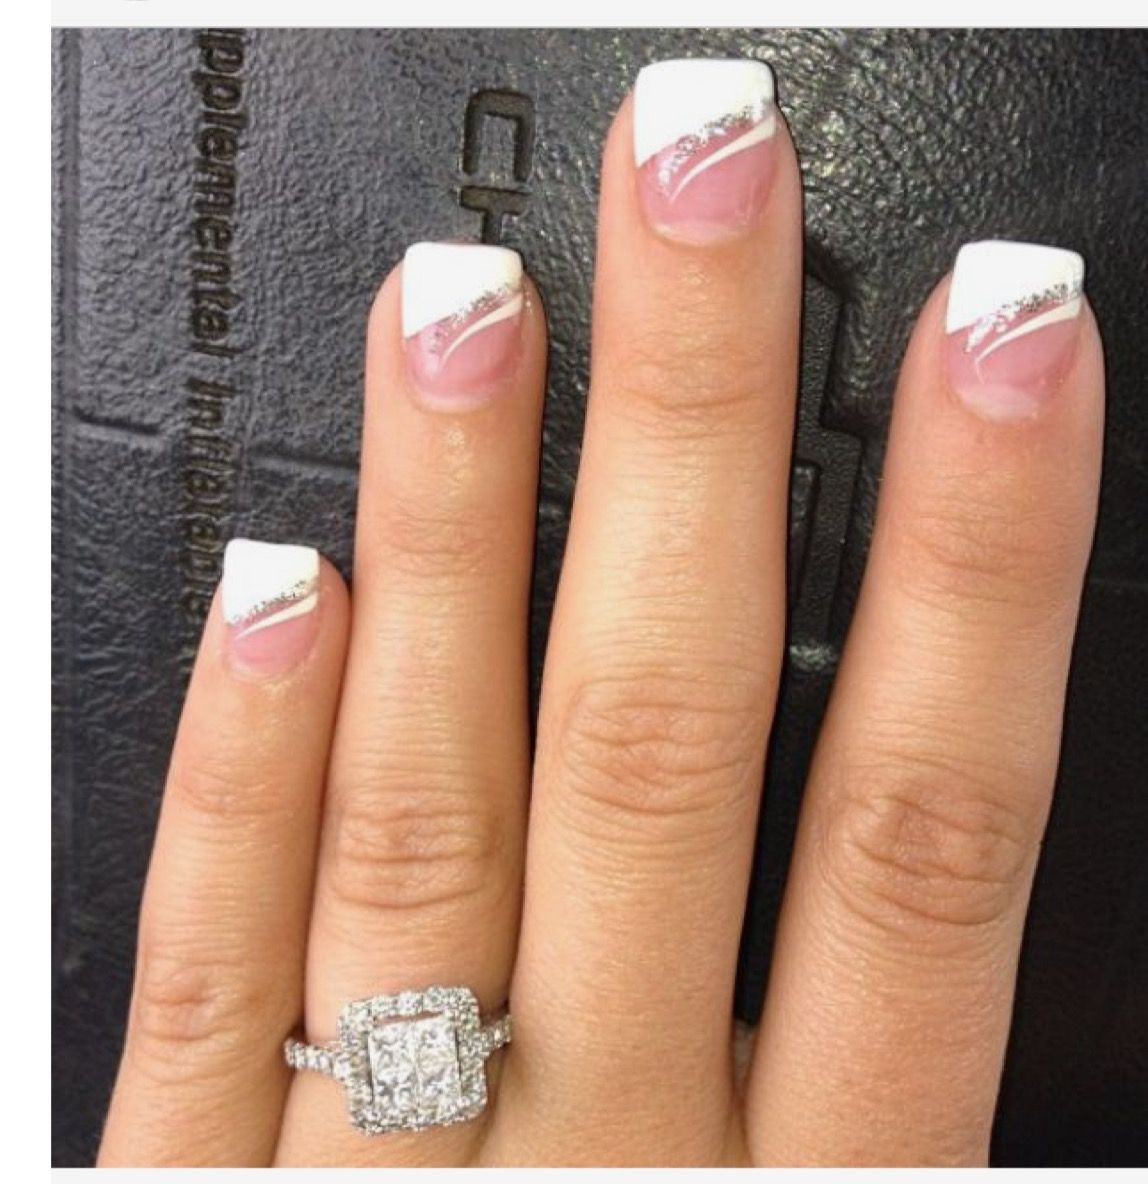 Nail Designs For French Manicure
 Fancy French manicure Nails